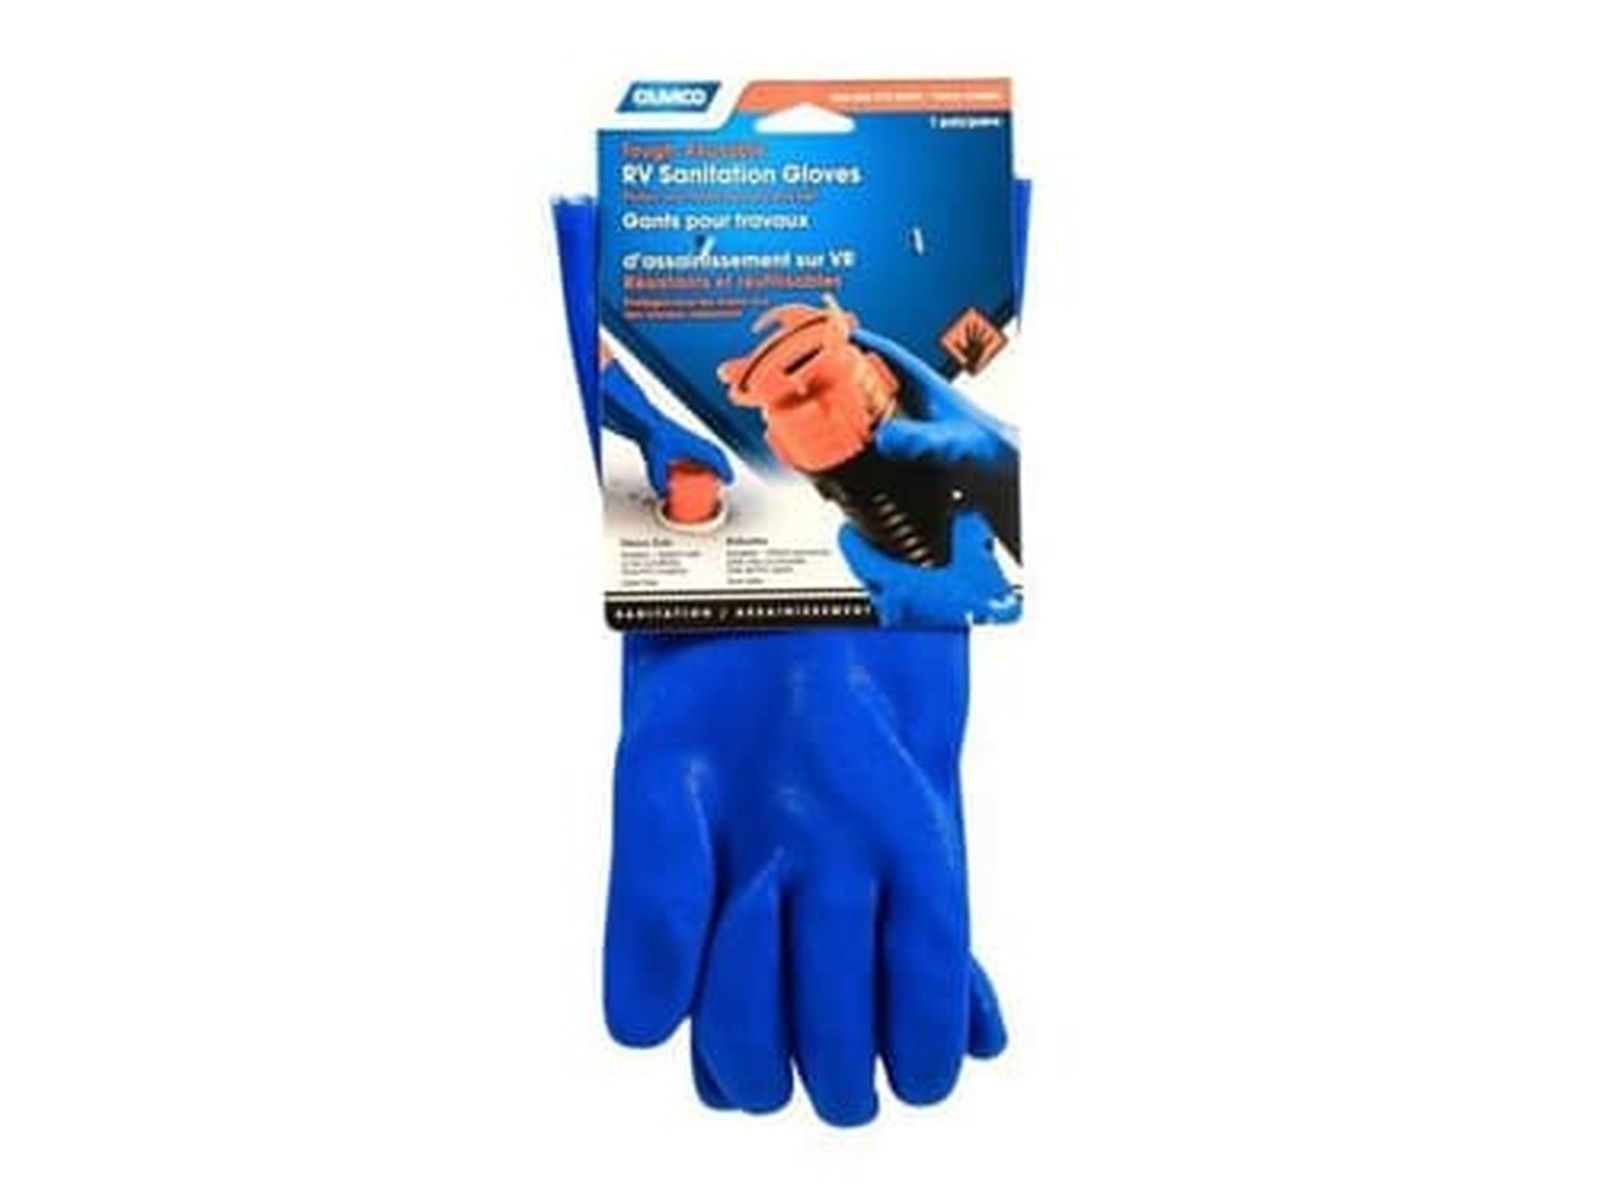 RV Sanitation Gloves, 1 Pair, One Size Fits Most, Bilingual